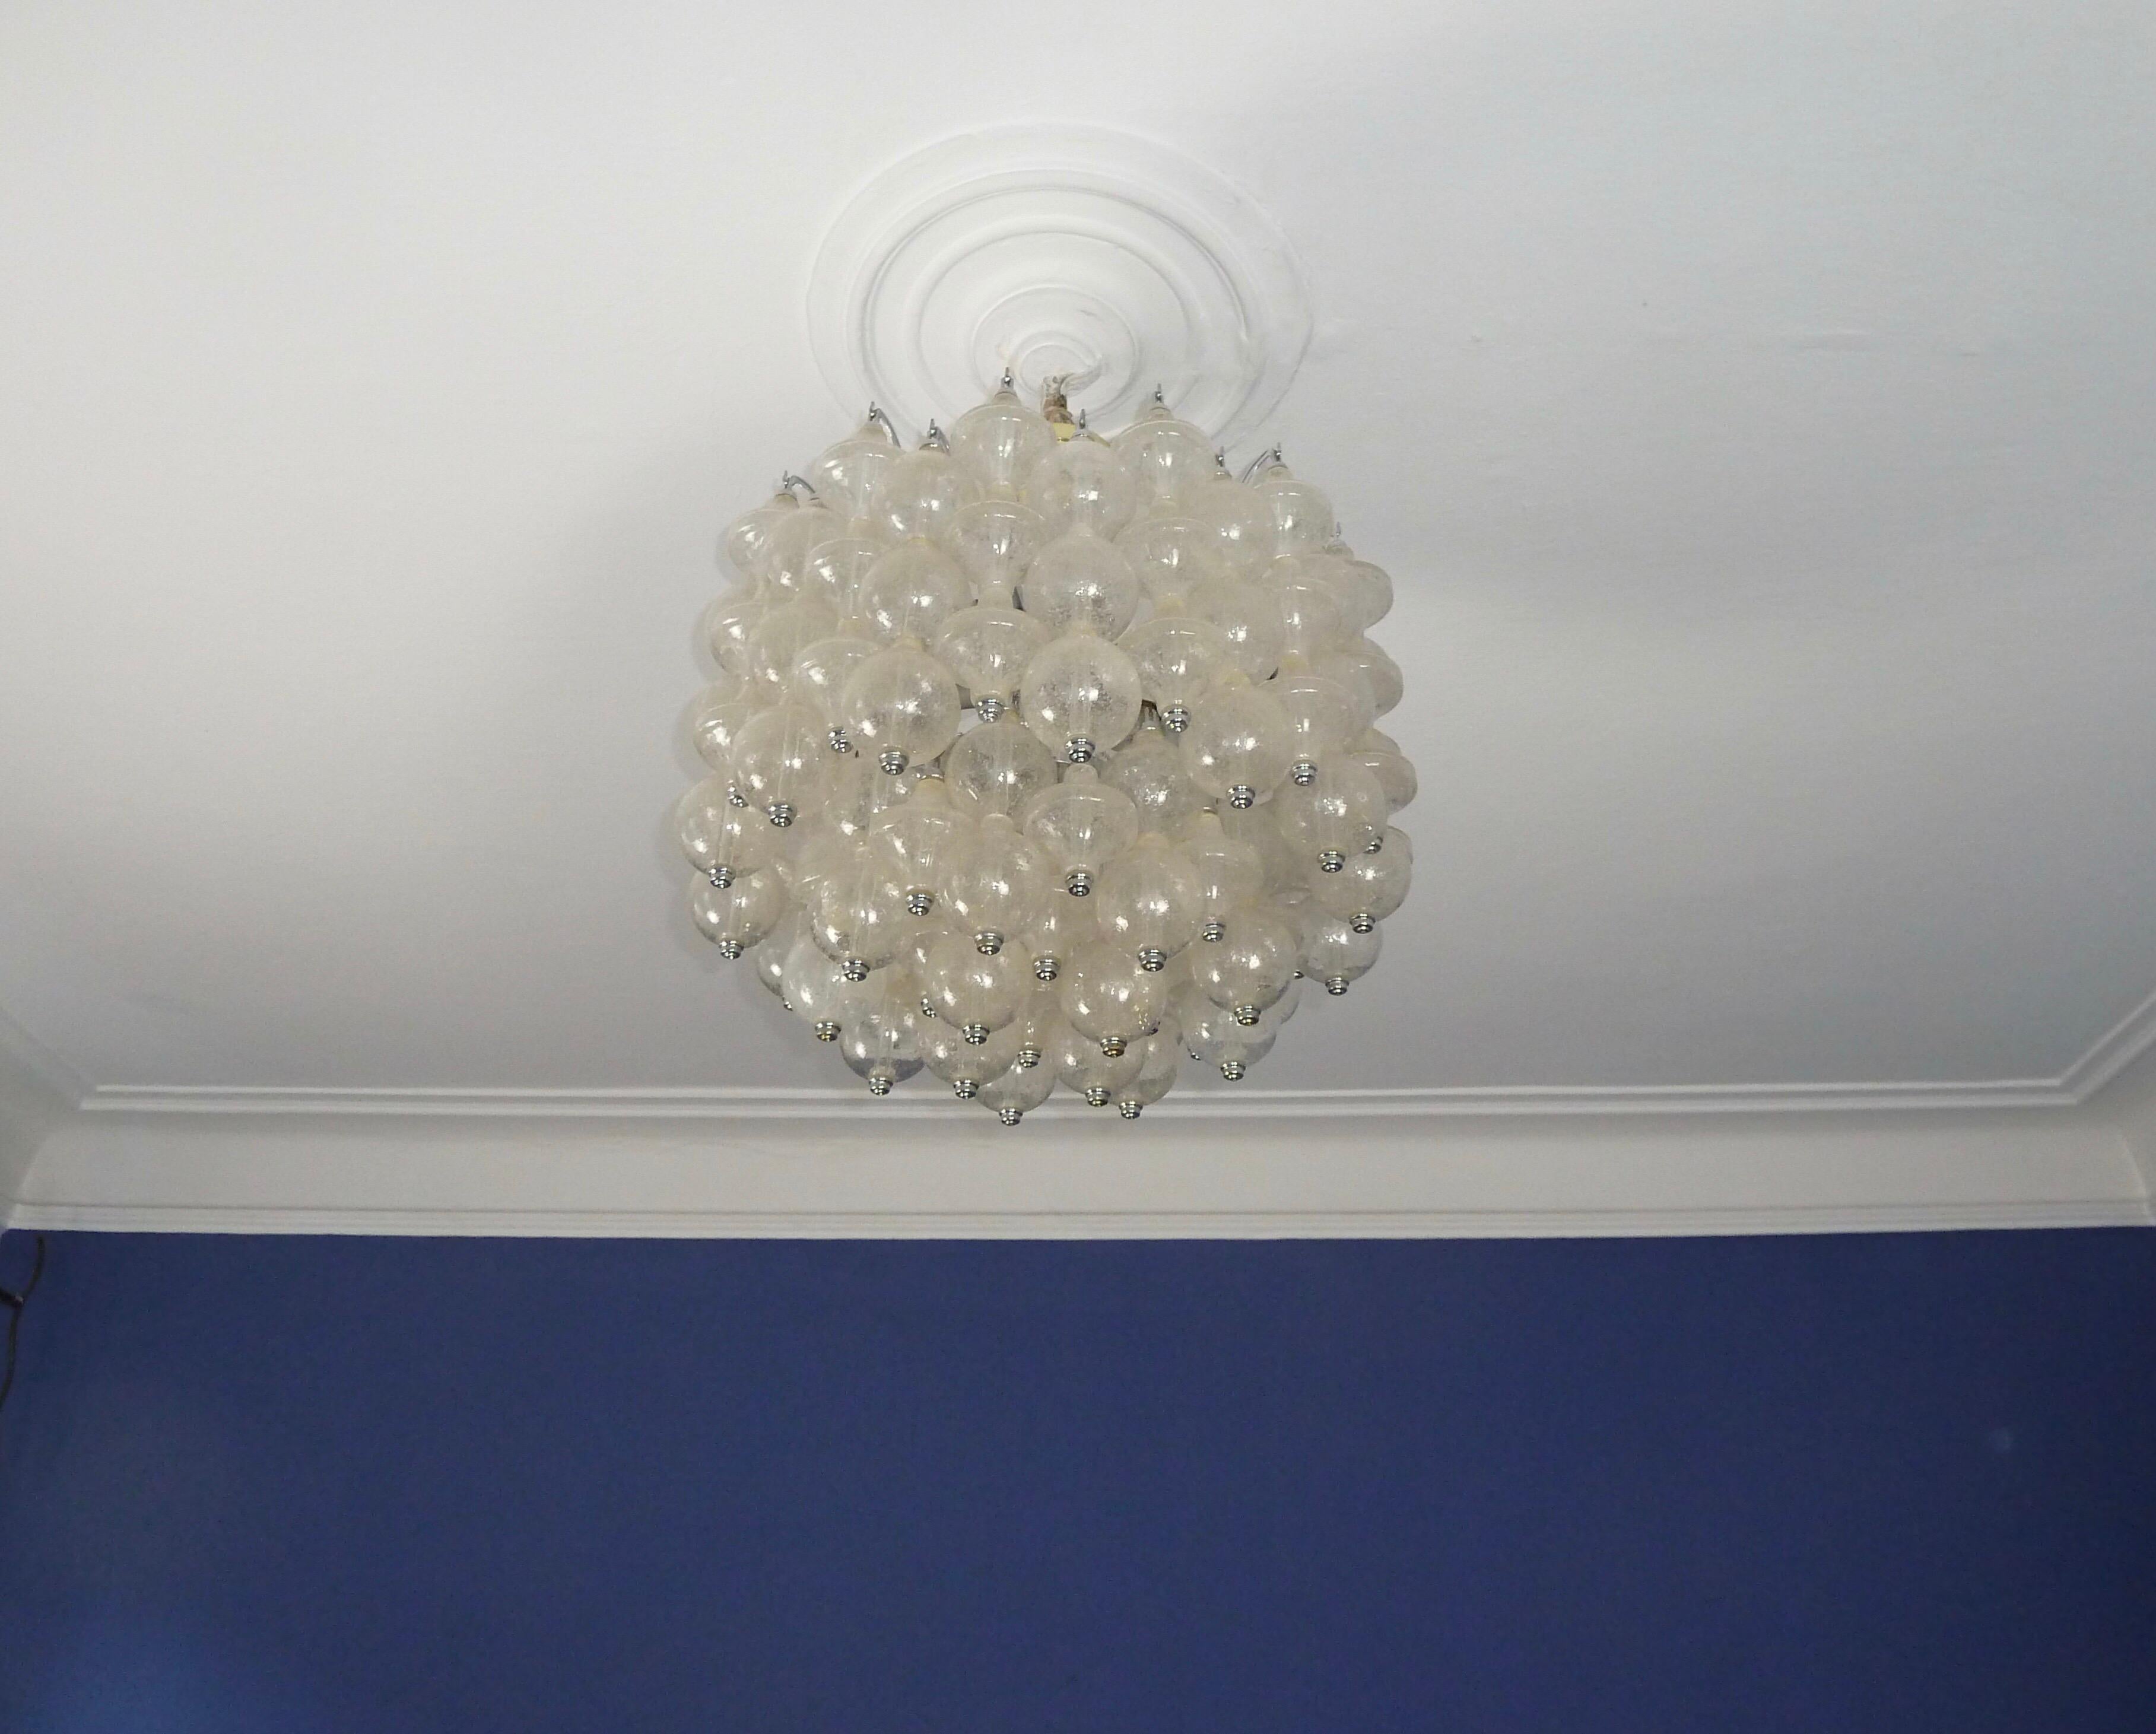 Rare Large and Bright 1970s Murano Seguso Ball Chandelier by OTT International For Sale 13